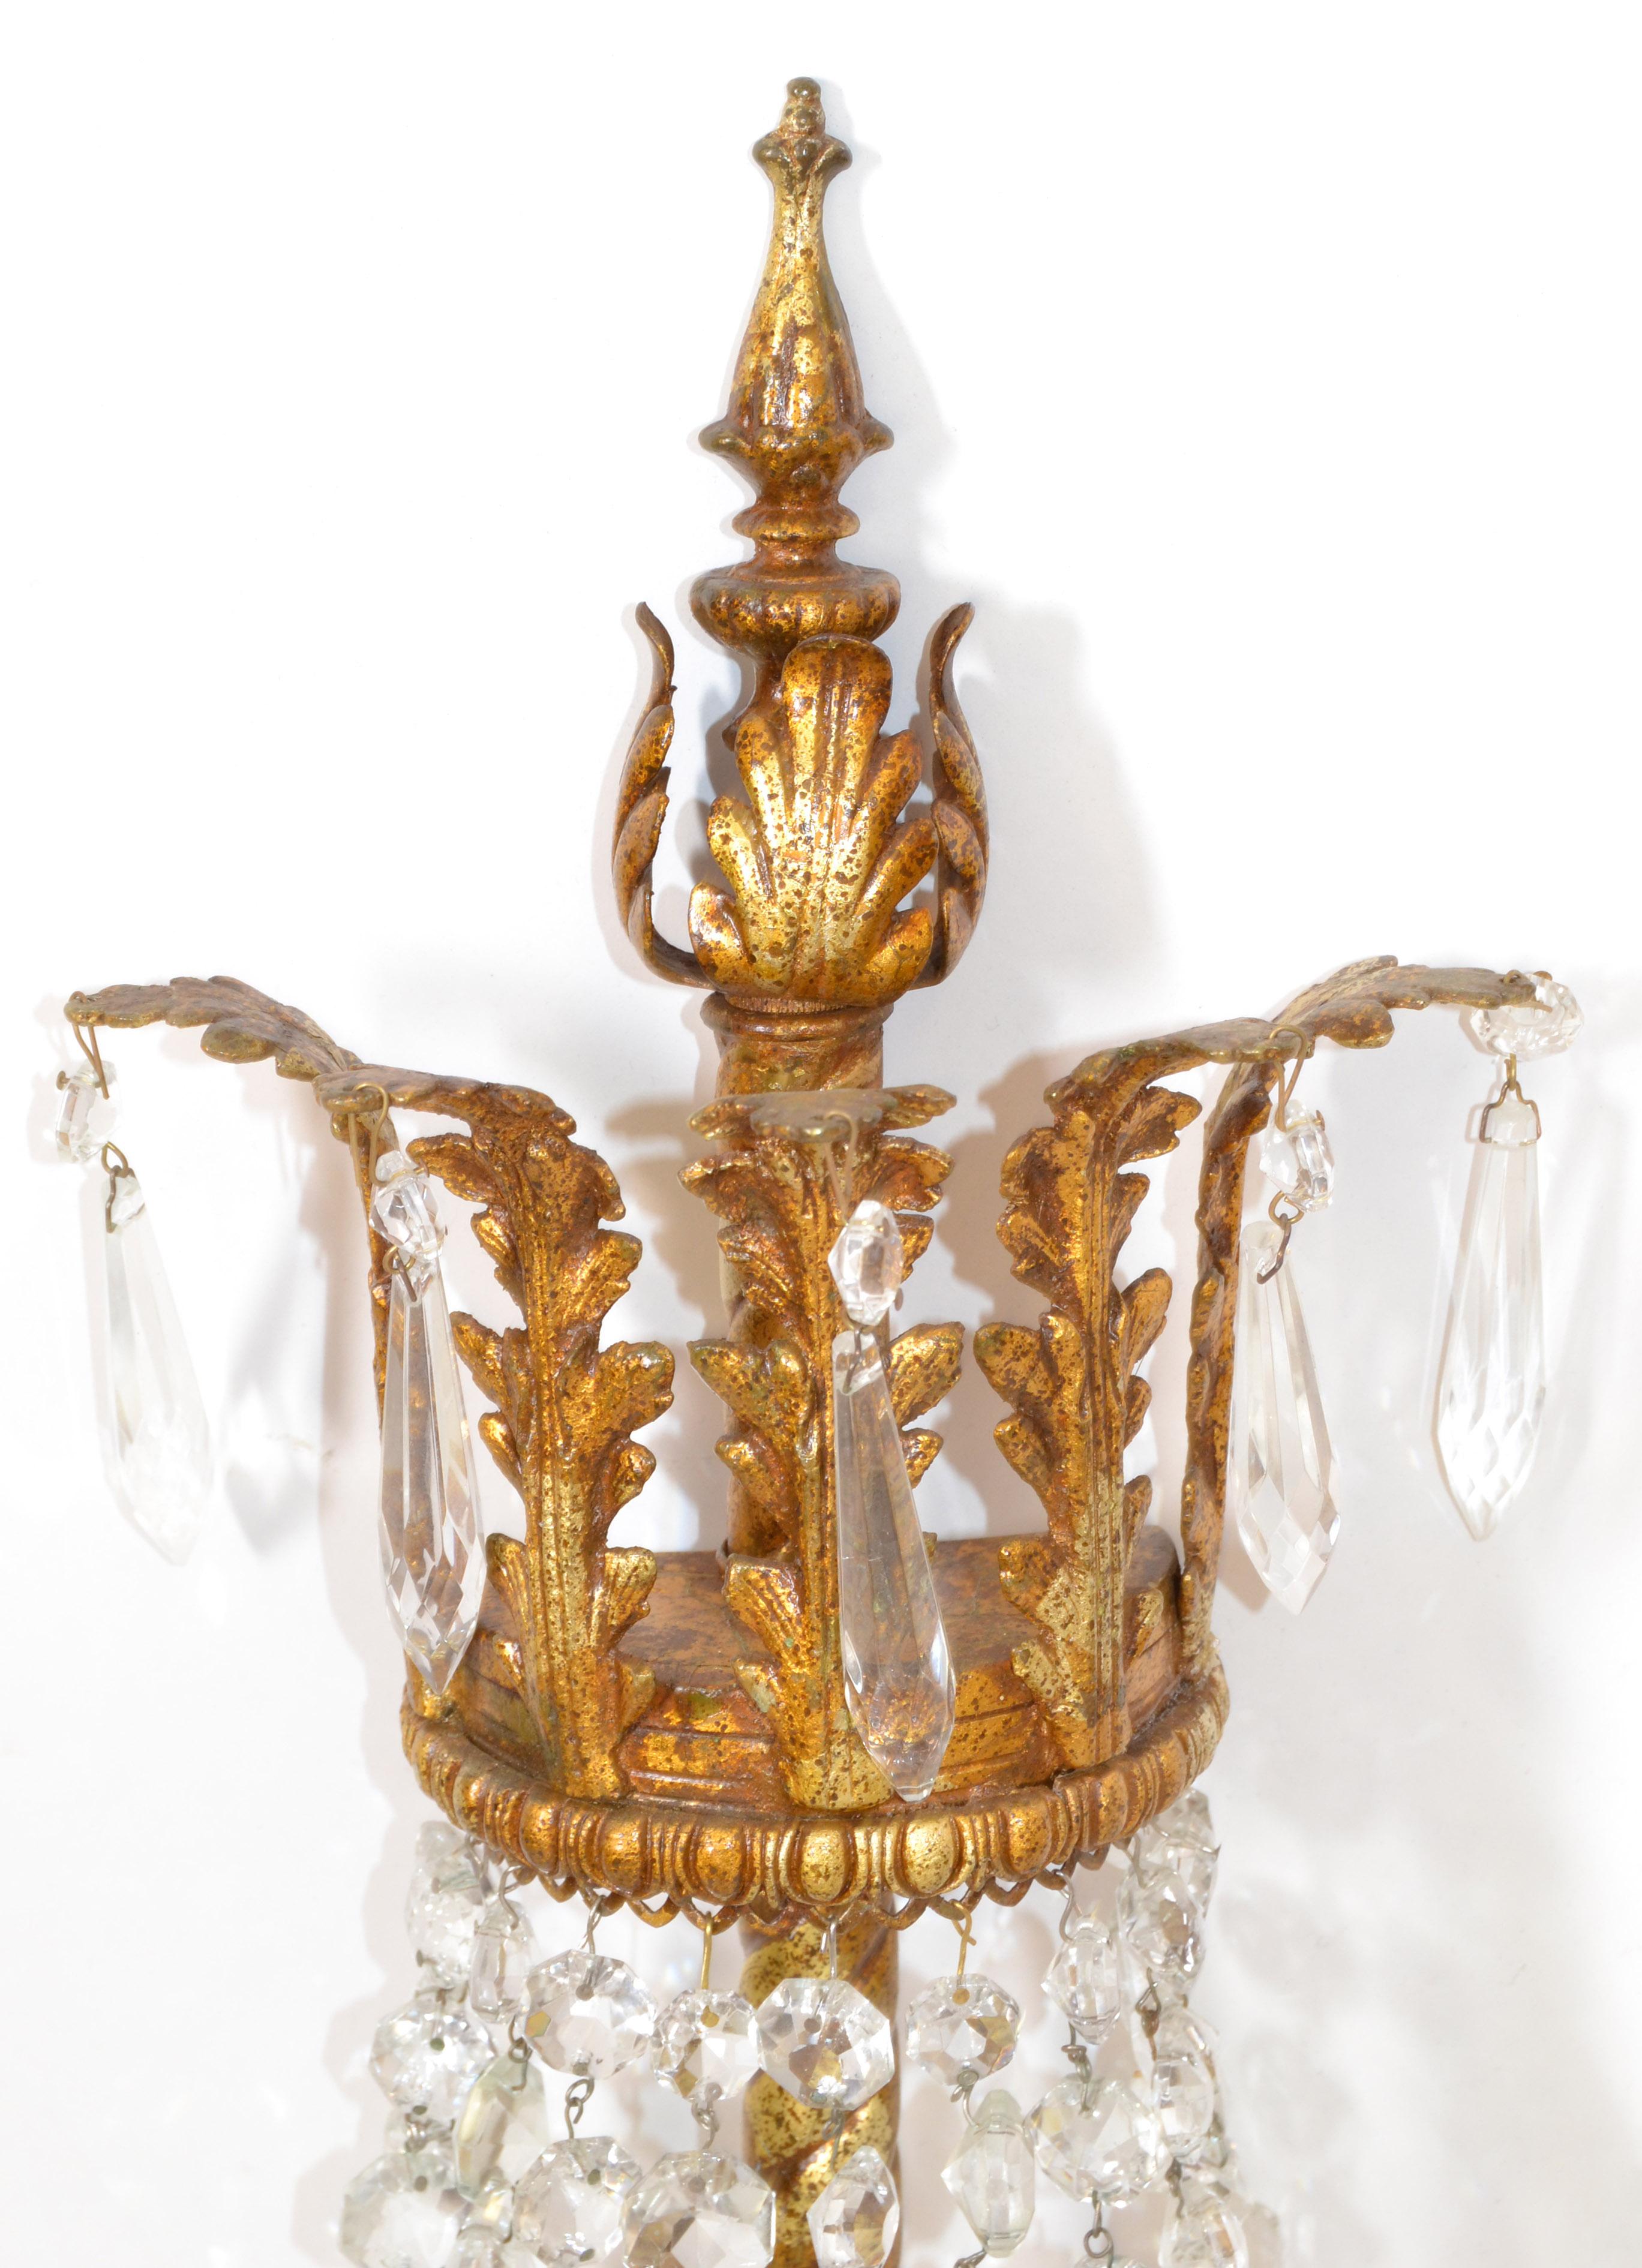 Early Italian Empire Style Gilt Metal Bronze & Crystal 2 Lights Sconce Wall Lamp For Sale 1